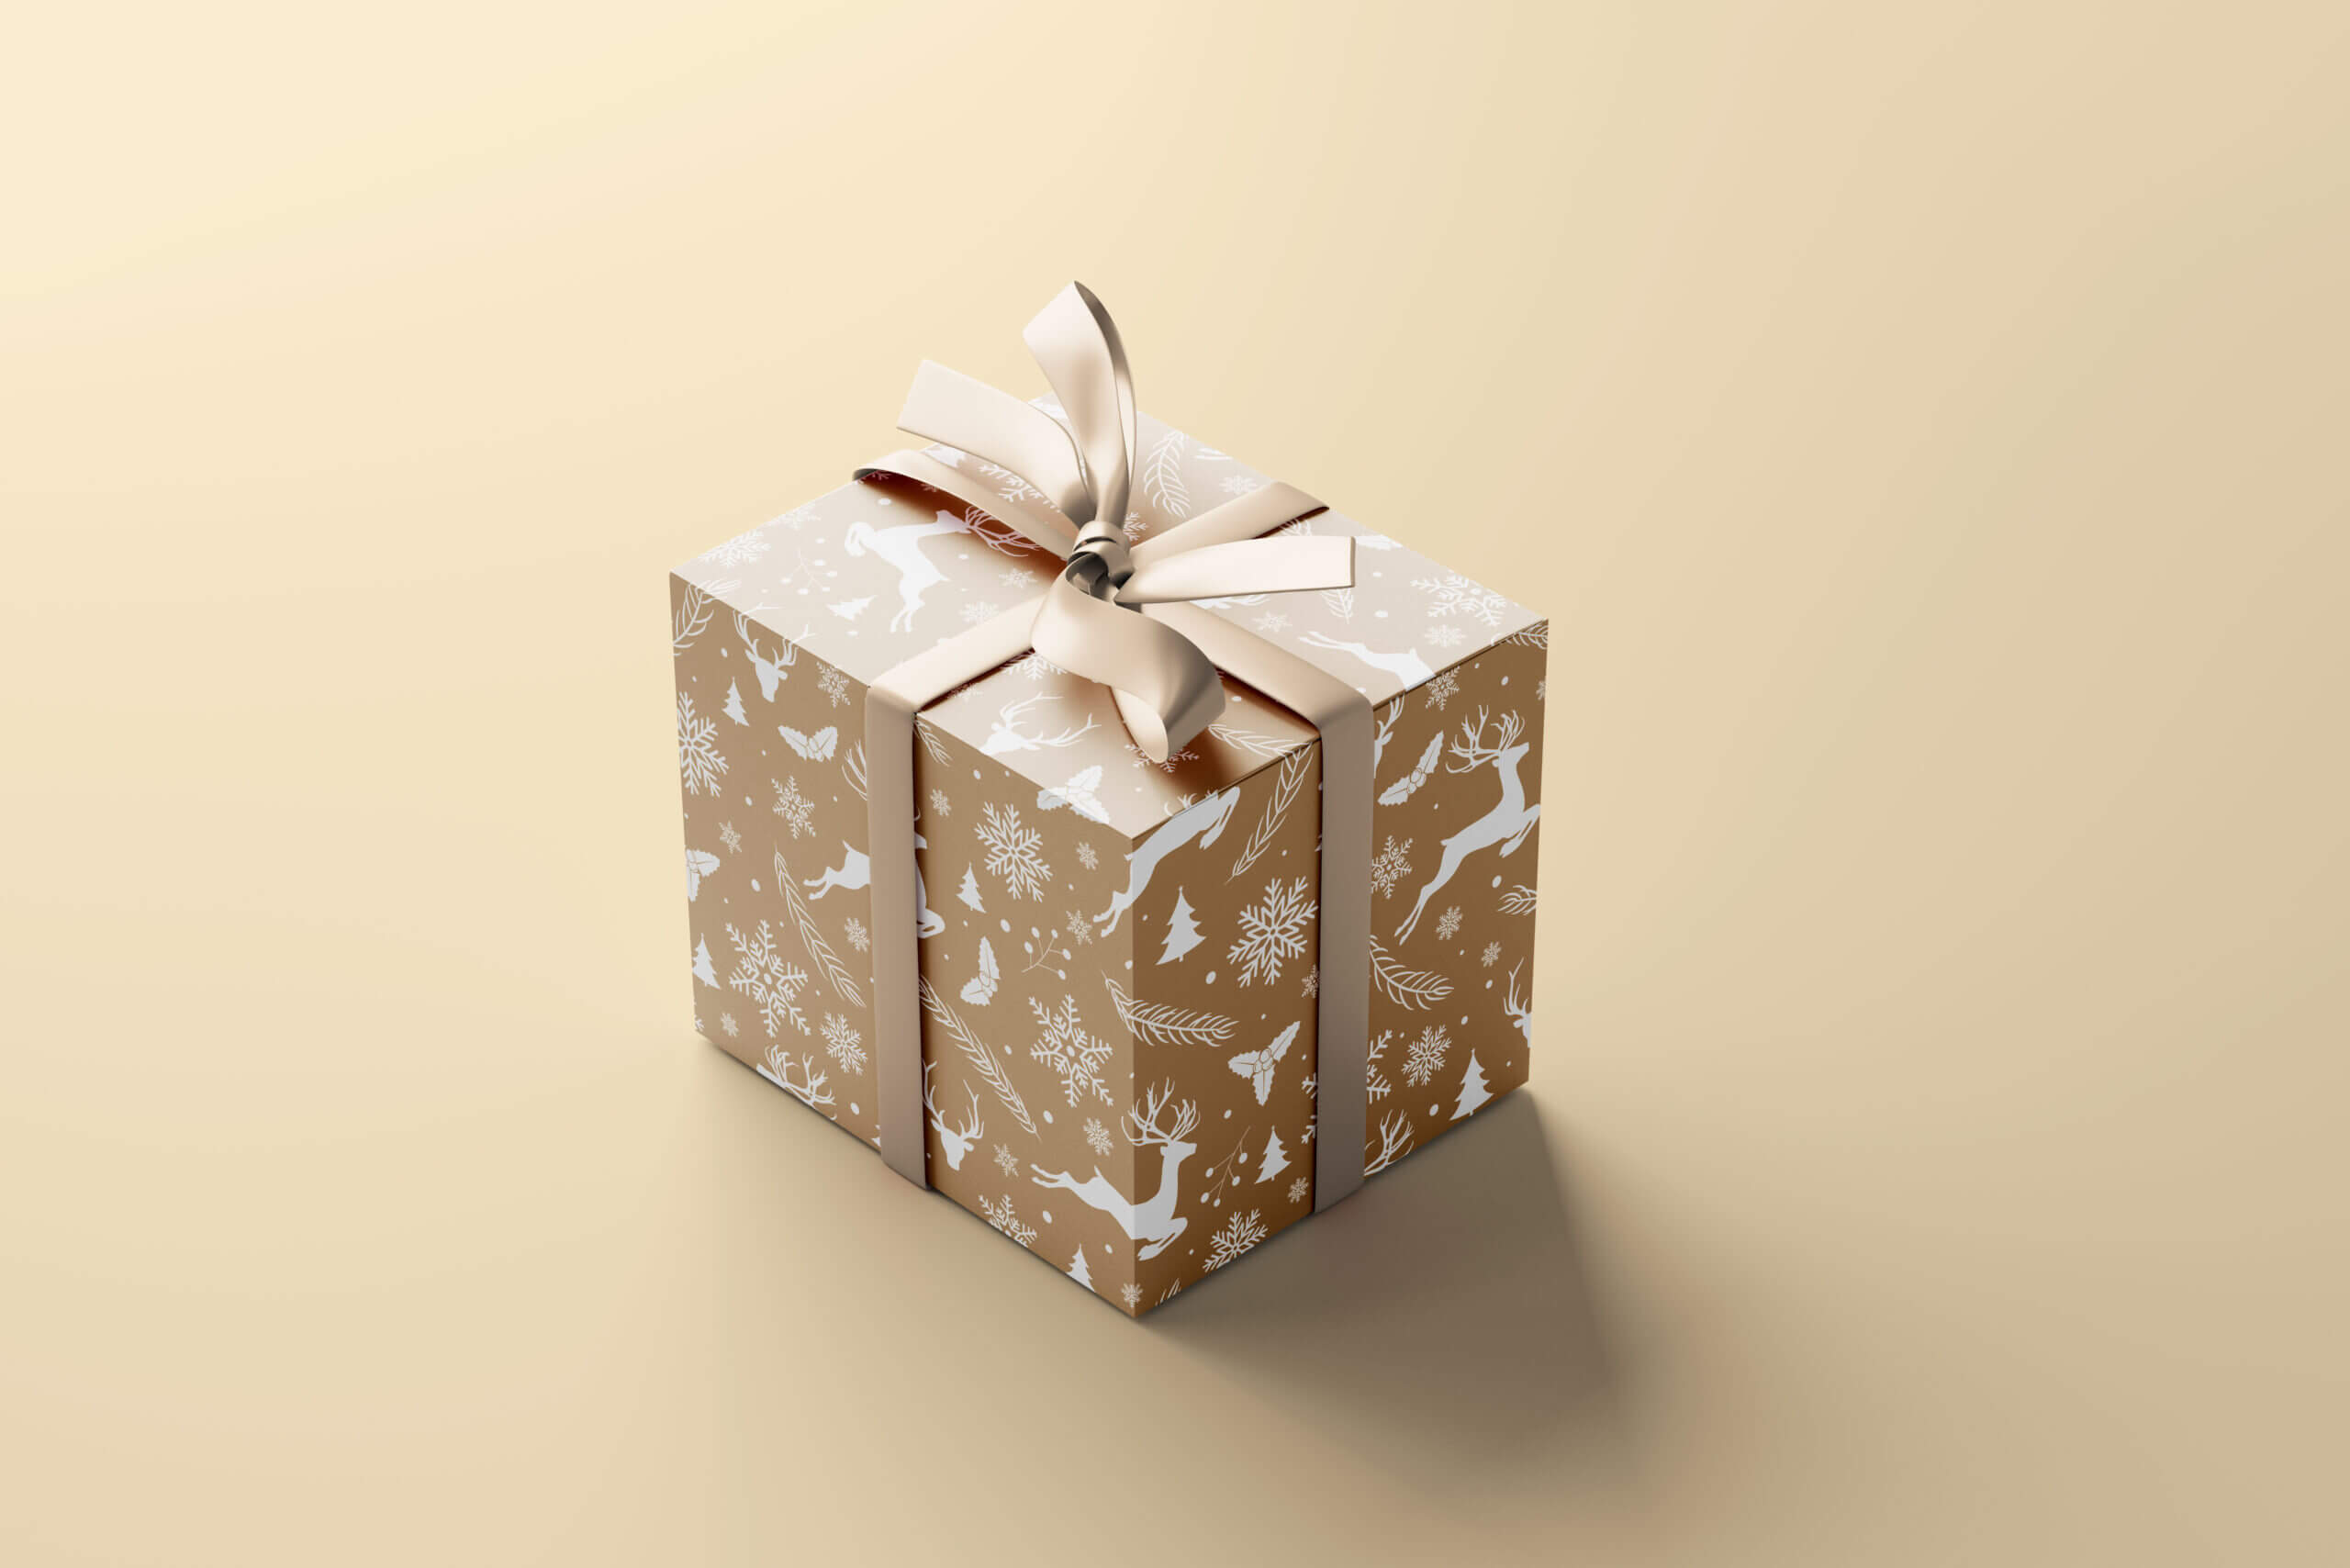 5 Free Wrapped With Ribbon Square Gift Box Mockup PSD Files1